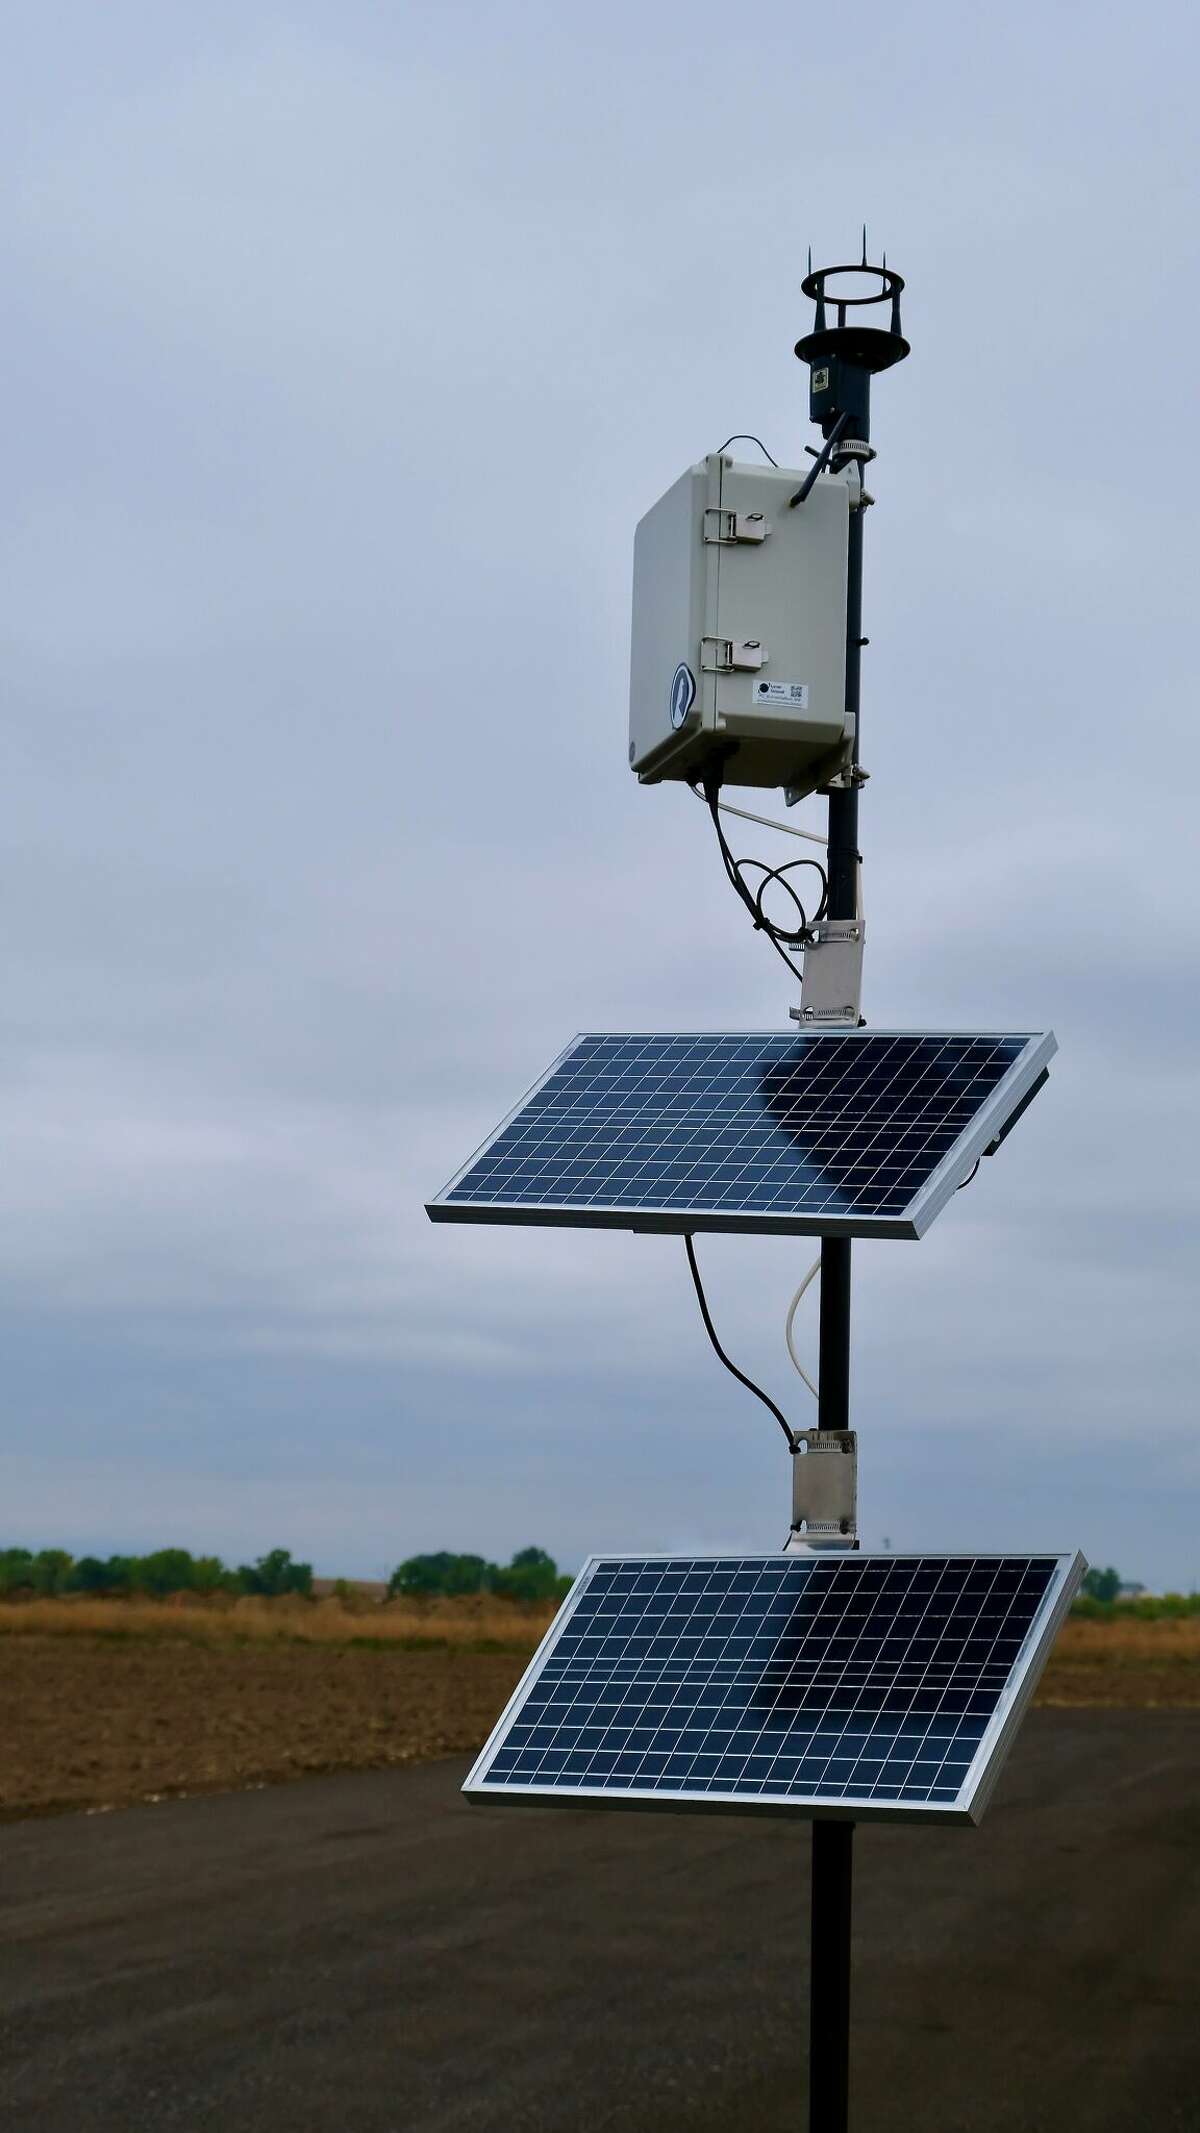 A Canary X continuous monitoring unit is used in Project Canary's evaluation of a producer's environmental performance in producing its natural gas.